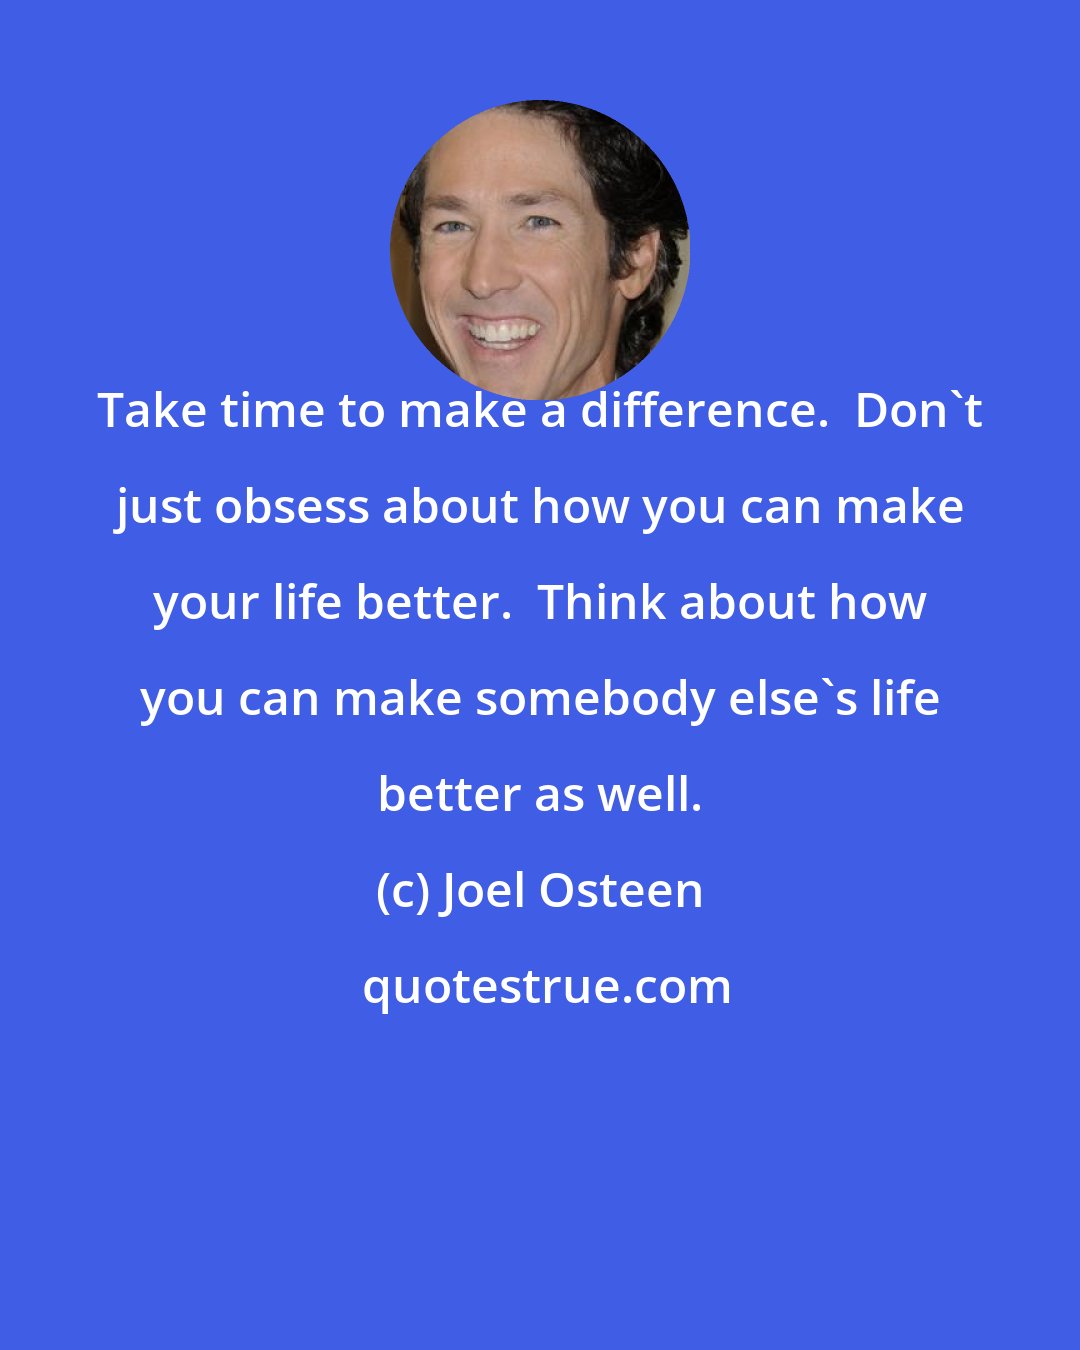 Joel Osteen: Take time to make a difference.  Don't just obsess about how you can make your life better.  Think about how you can make somebody else's life better as well.